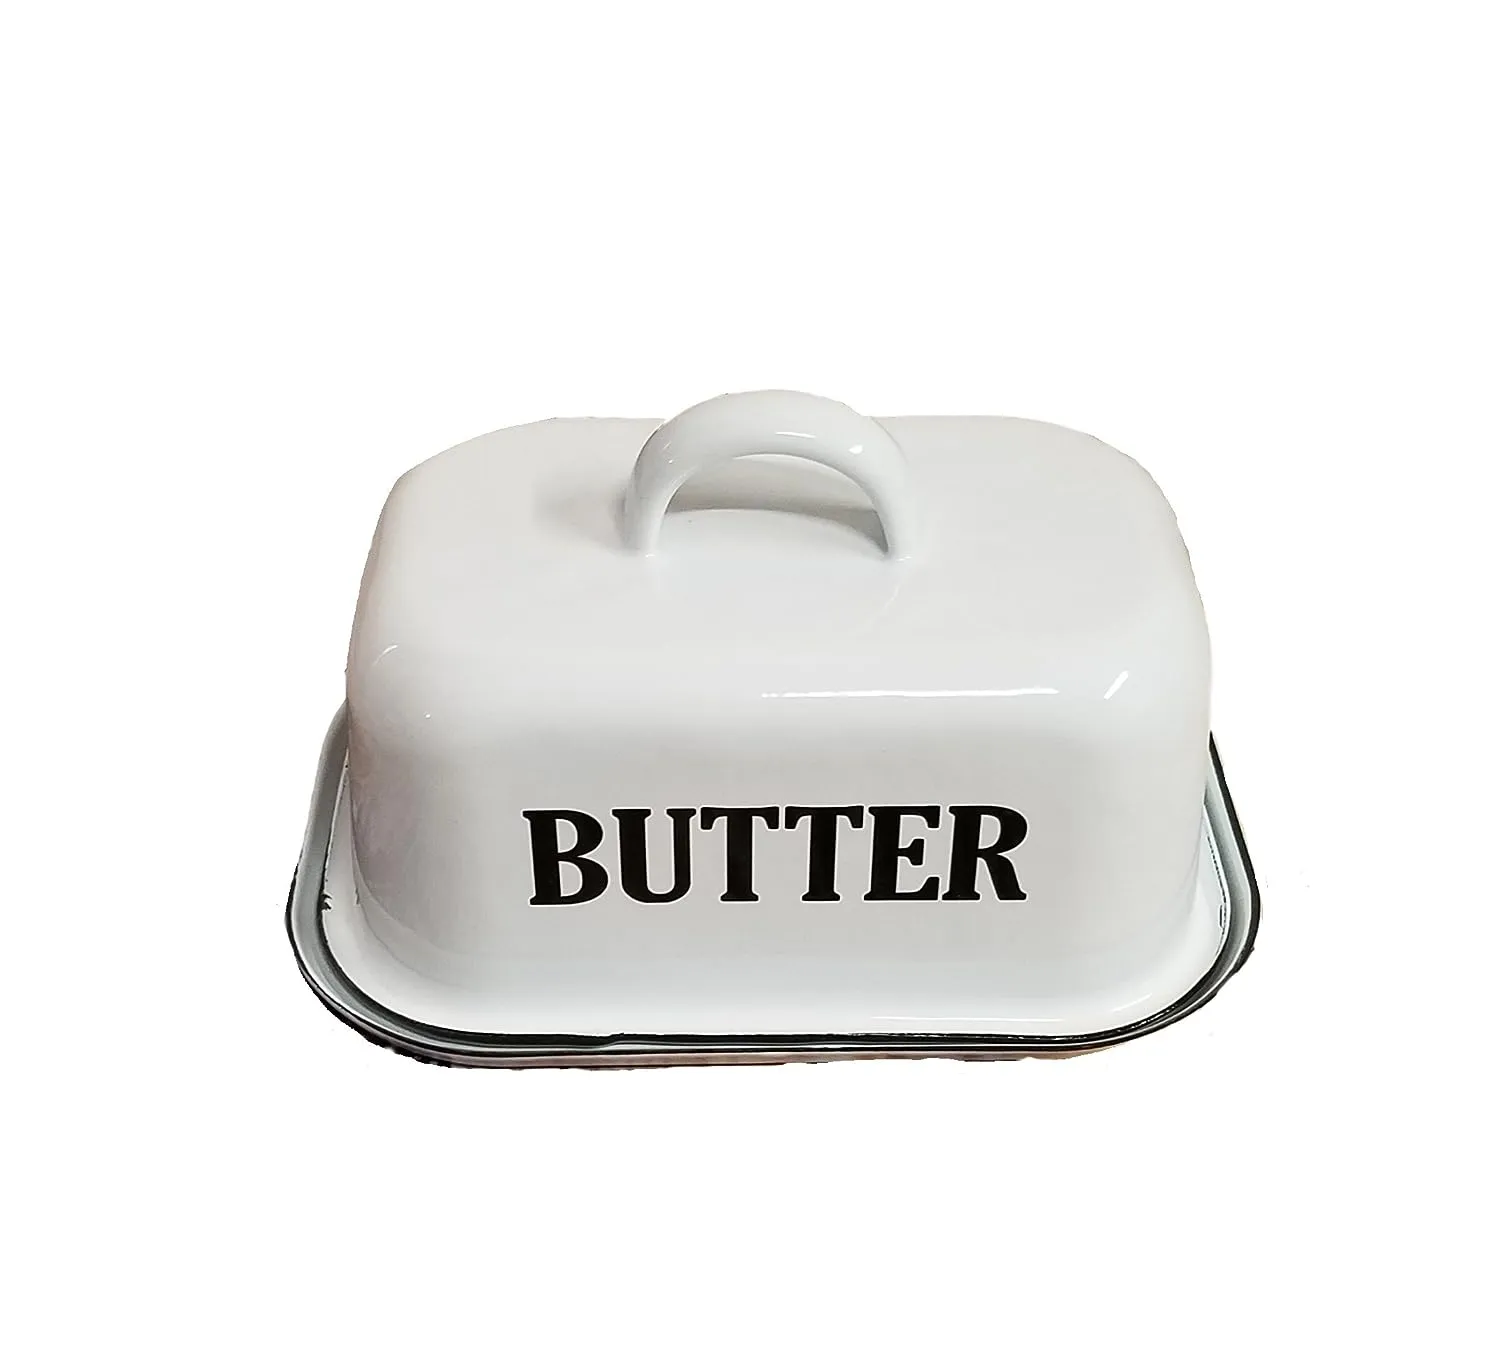 vintage dish butter with lid + best buy price